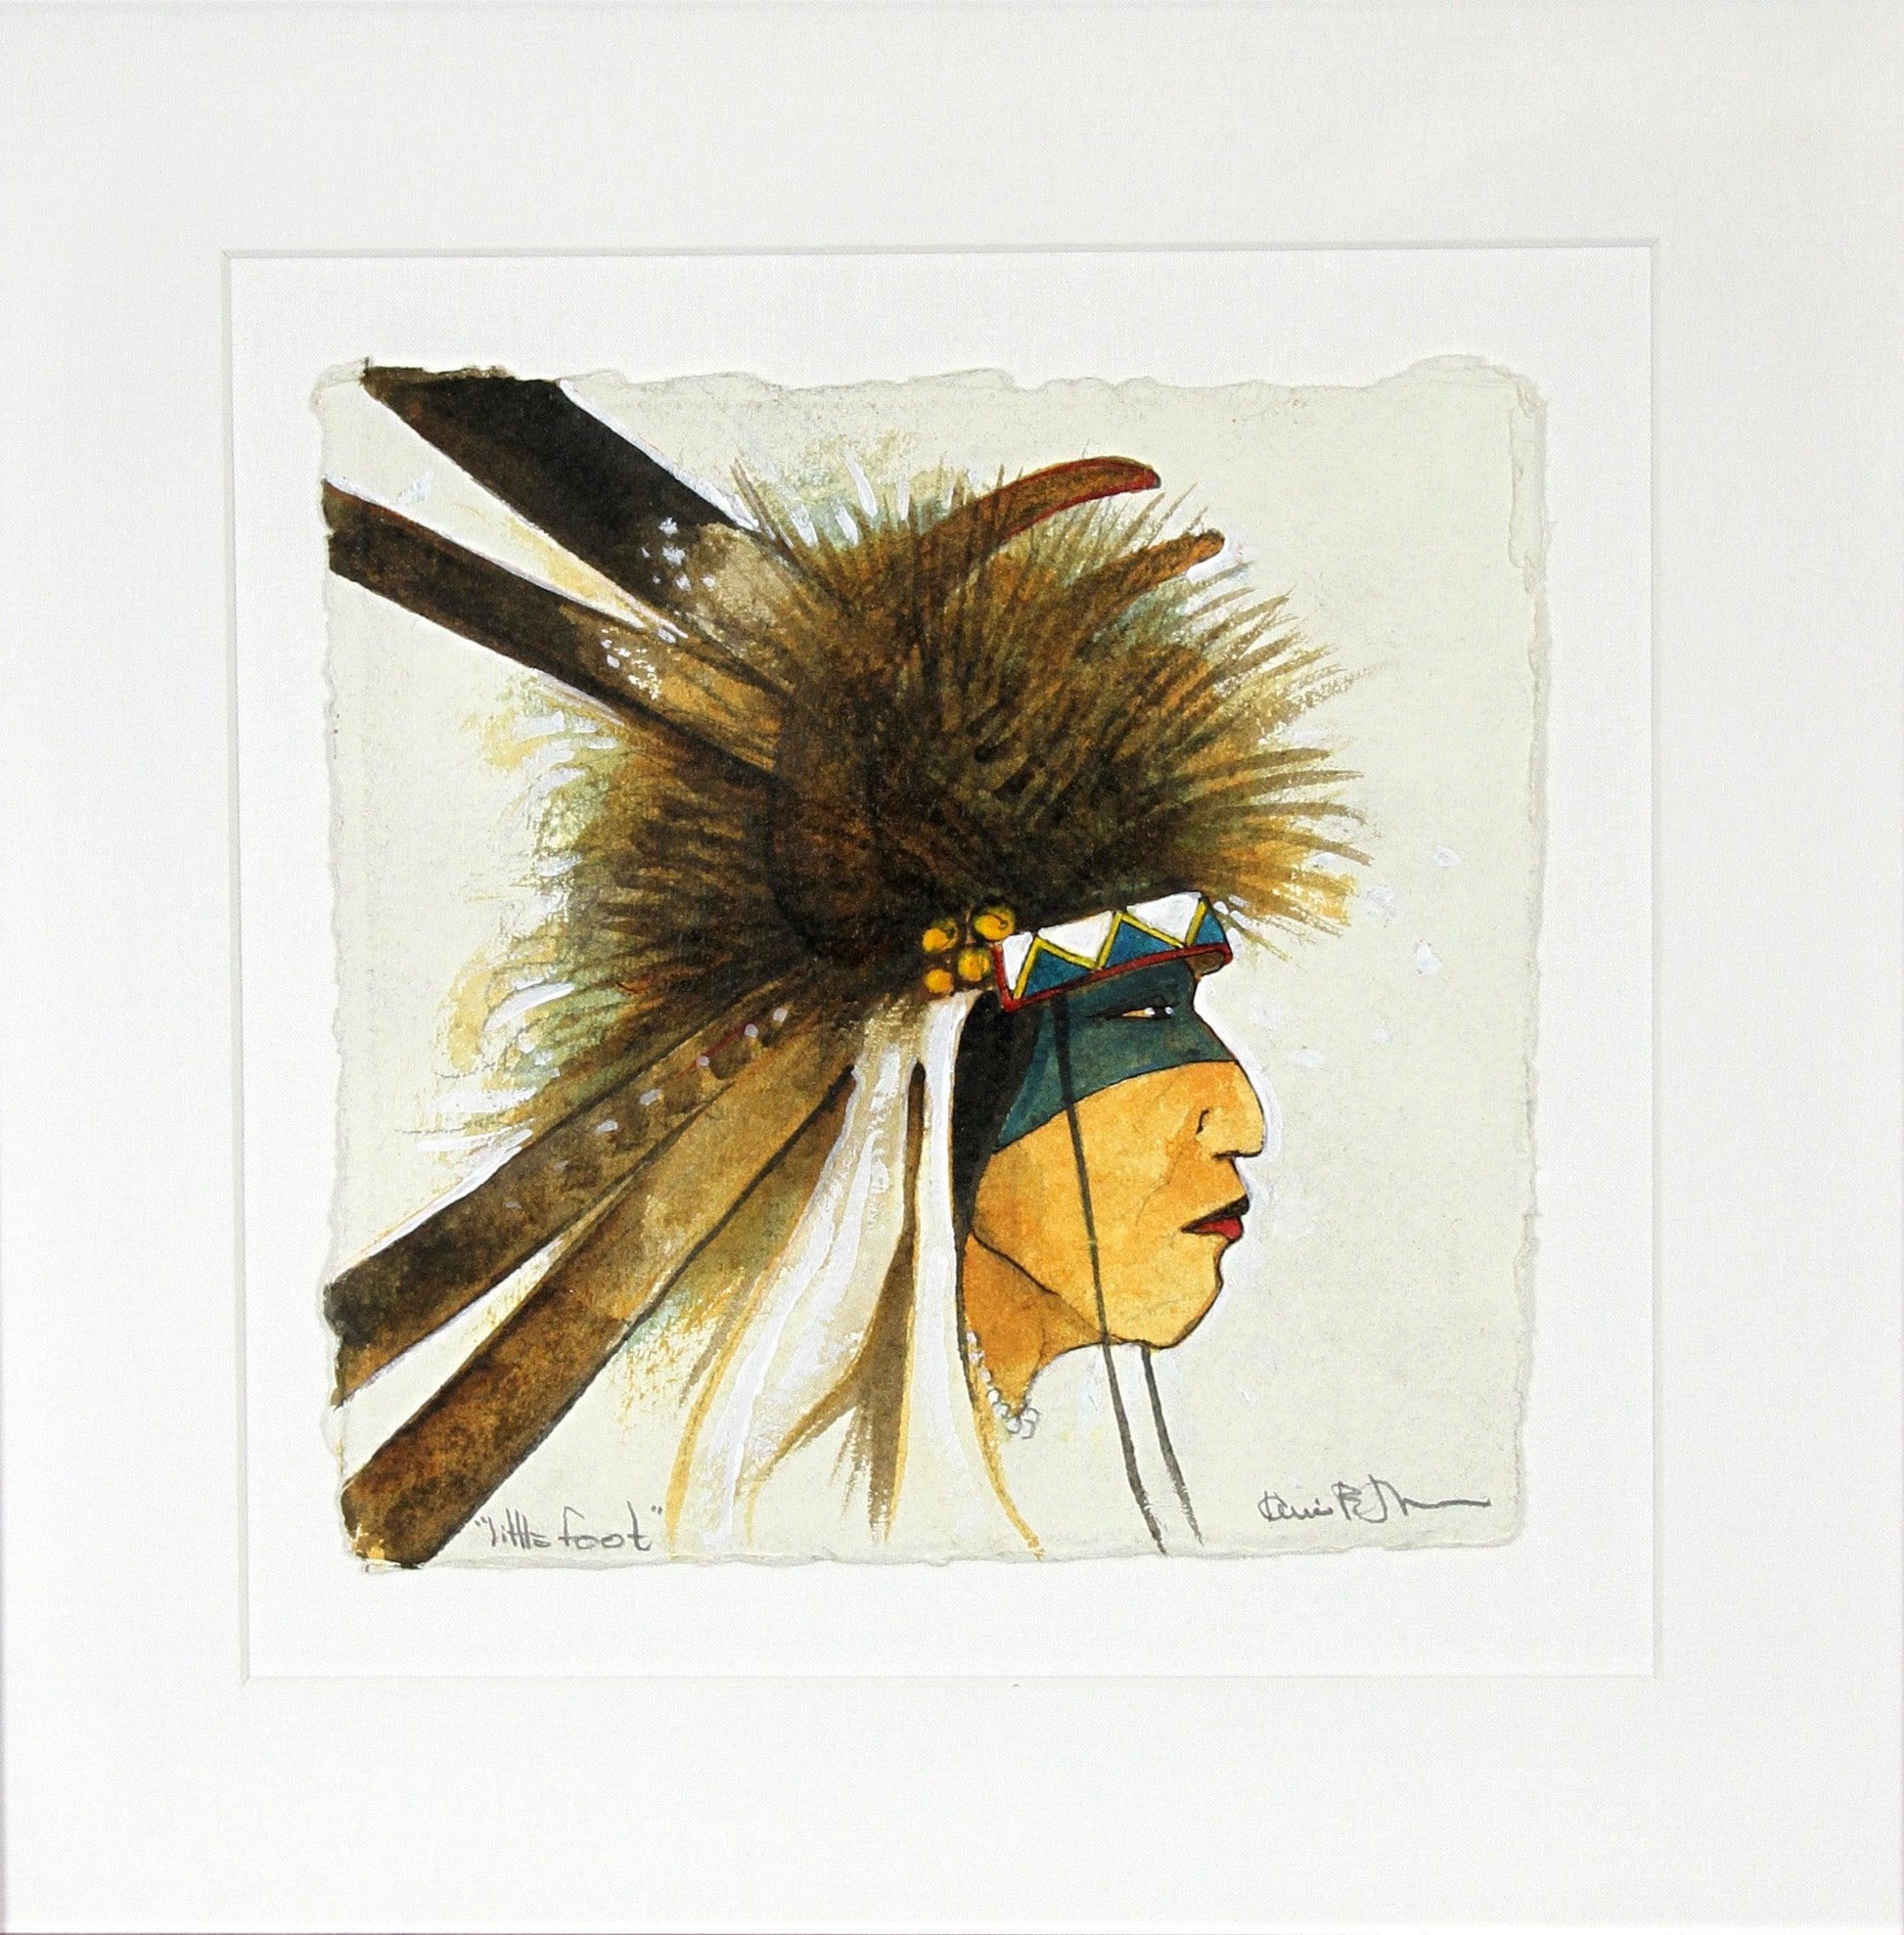 Young Crow Man with Buffalo Headdress-Mixed-Media Original-Kevin Red Star-Sorrel Sky Gallery